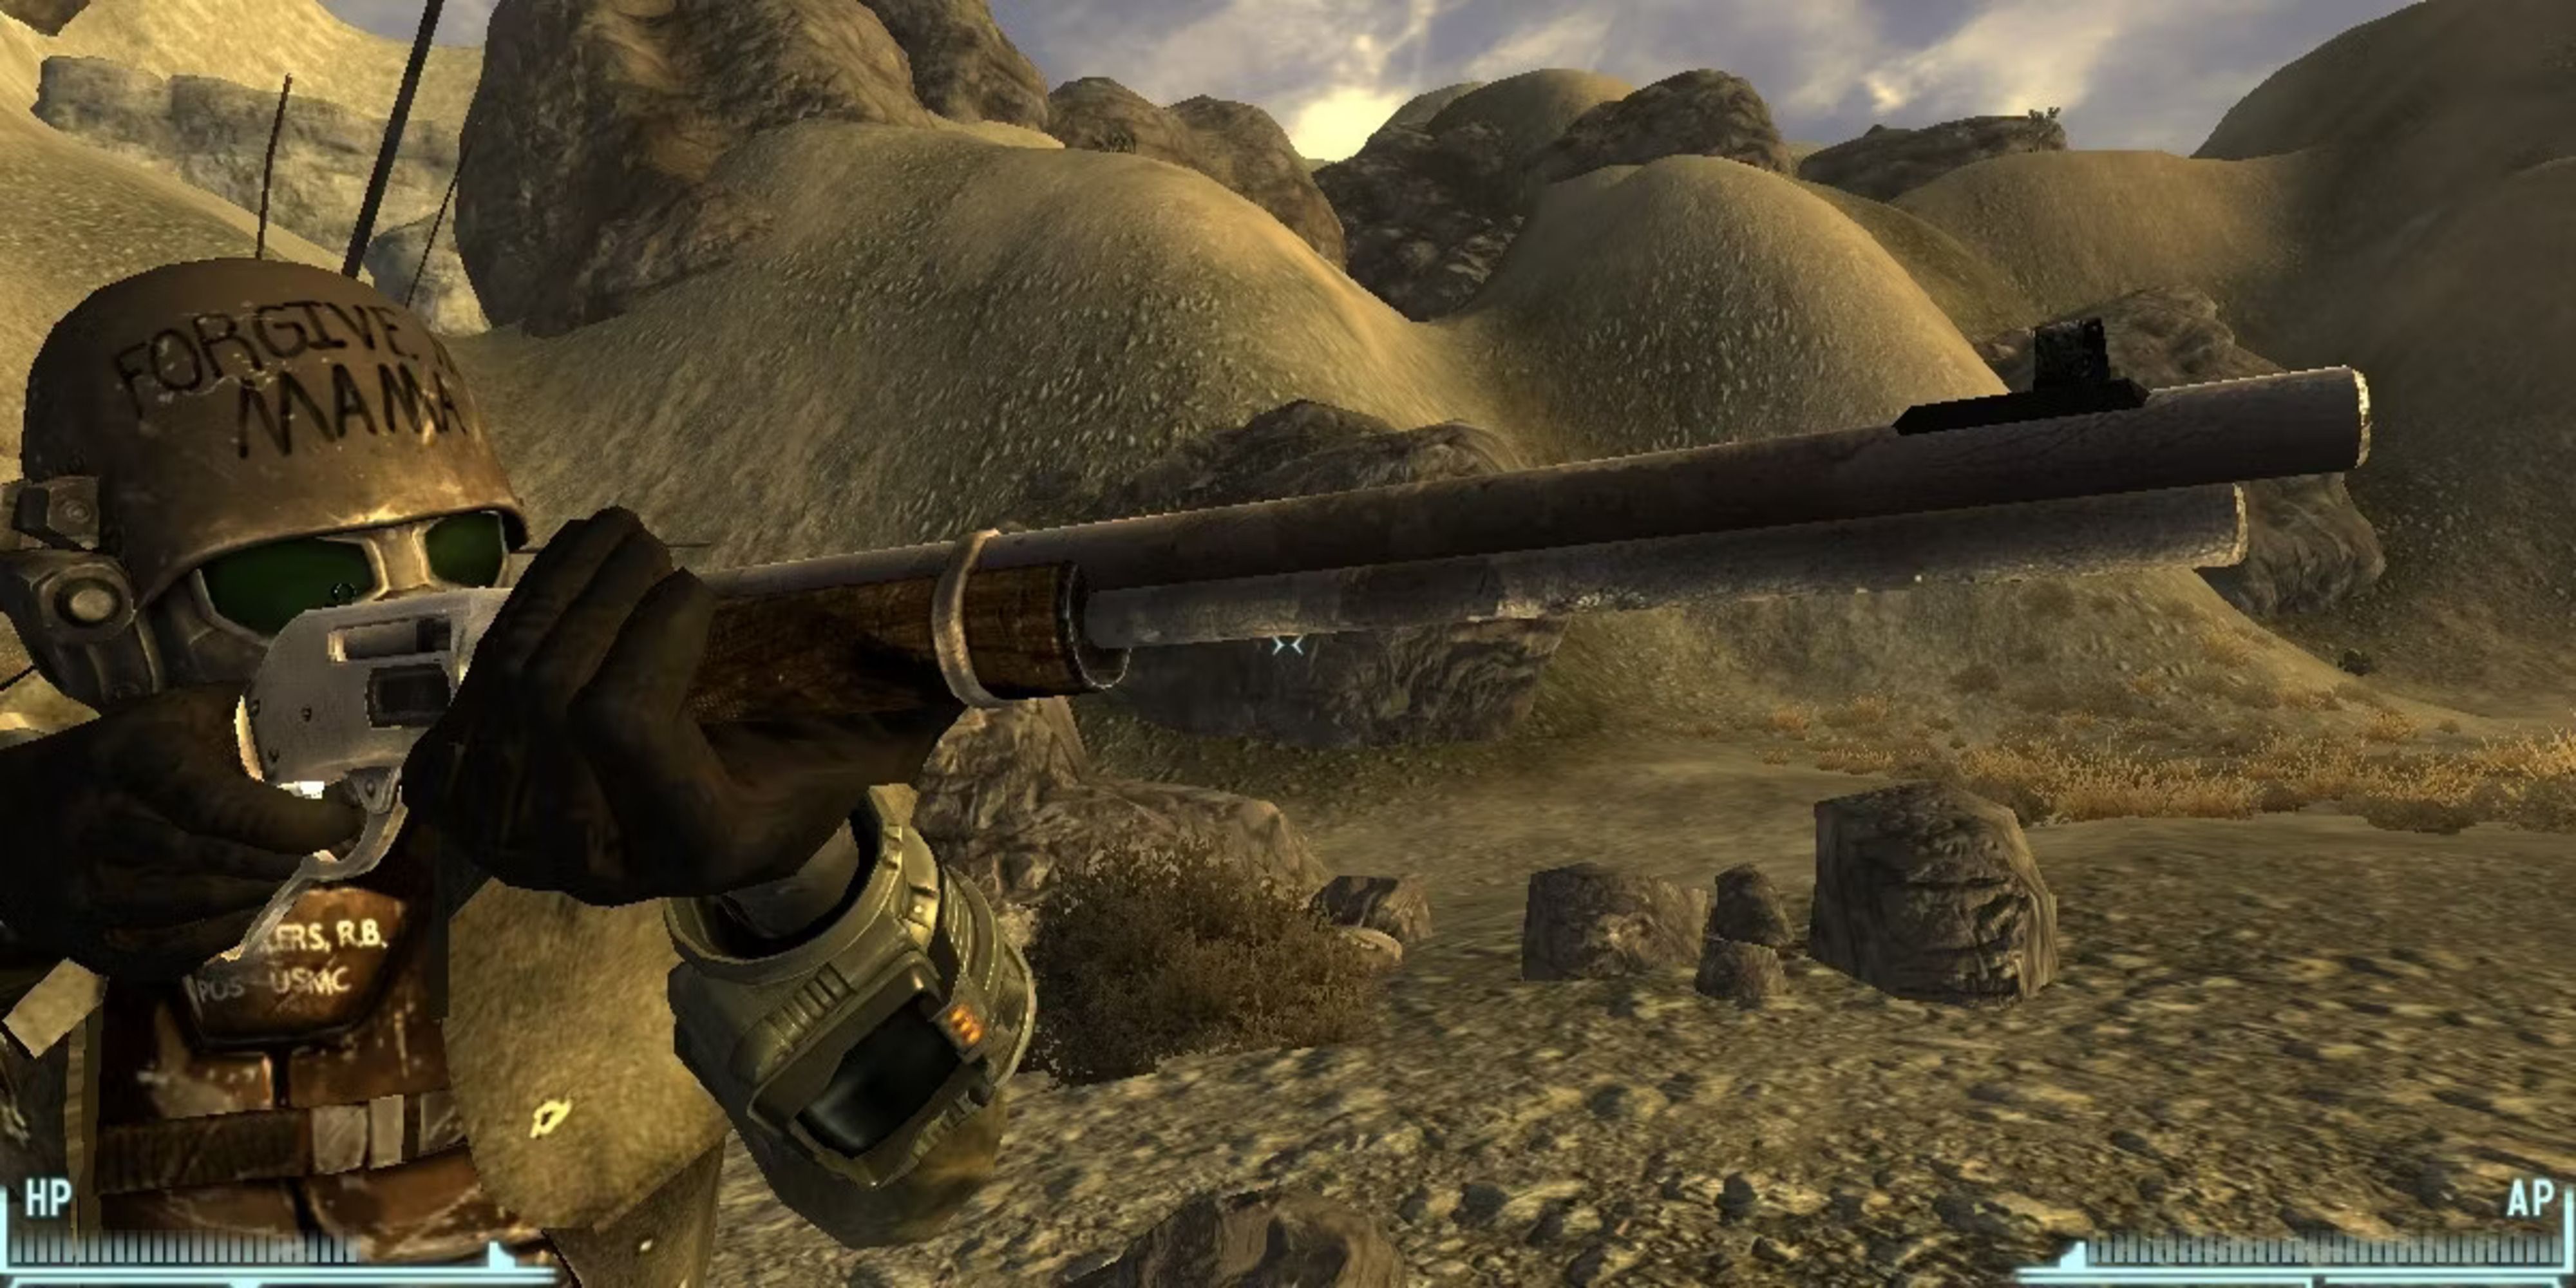 Player looking down the iron sights of the Medicine Stick in Fallout: New Vegas.